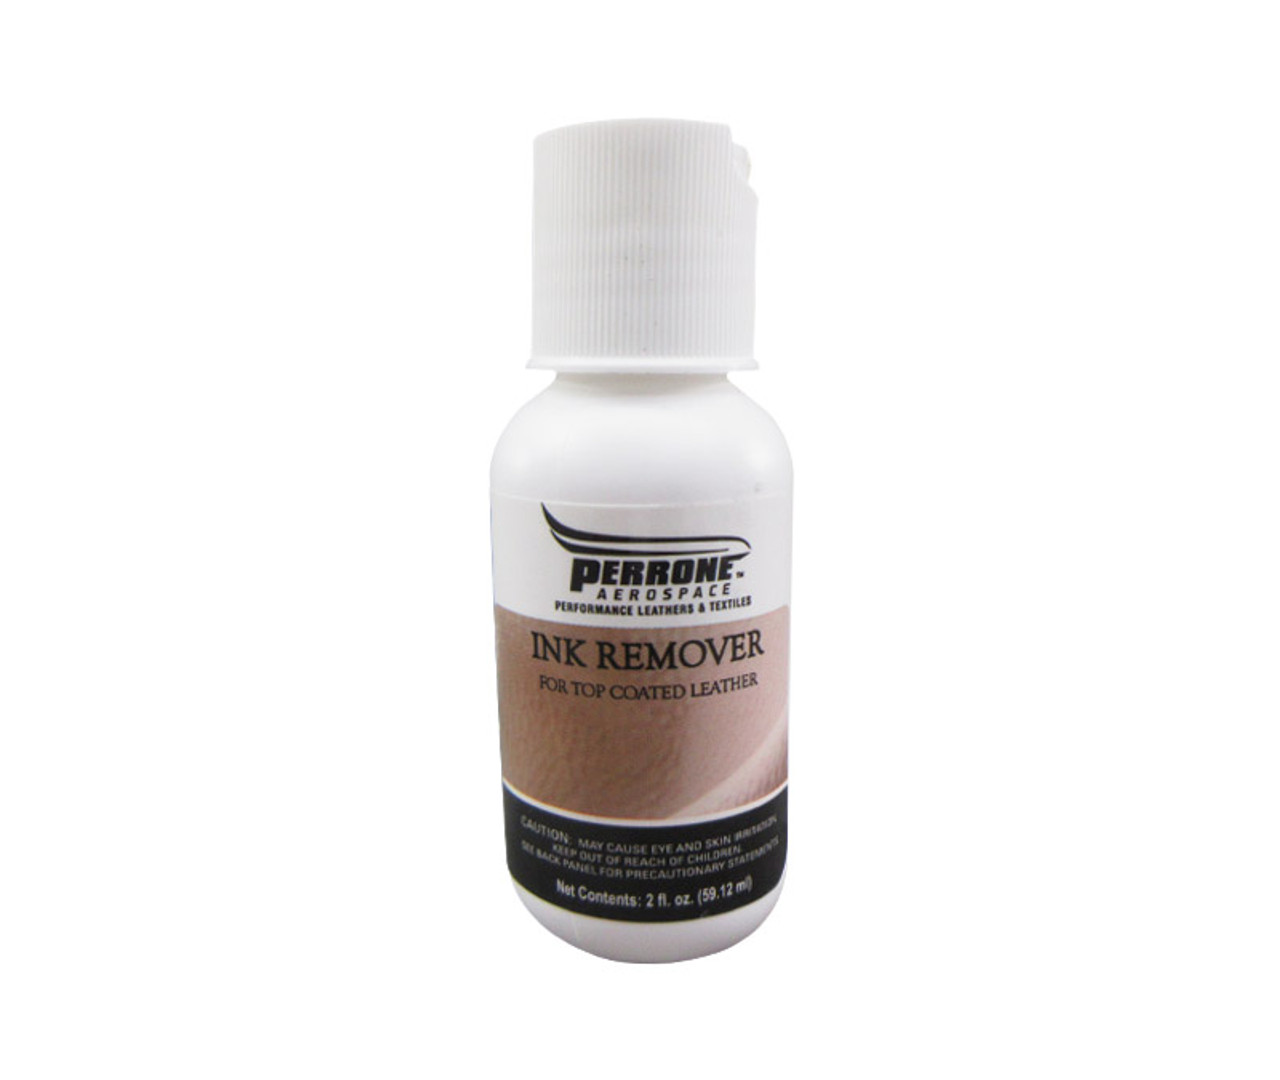 PERRONE™ IR-202 Ink Remover for Top Coated Leather - 2 oz Bottle